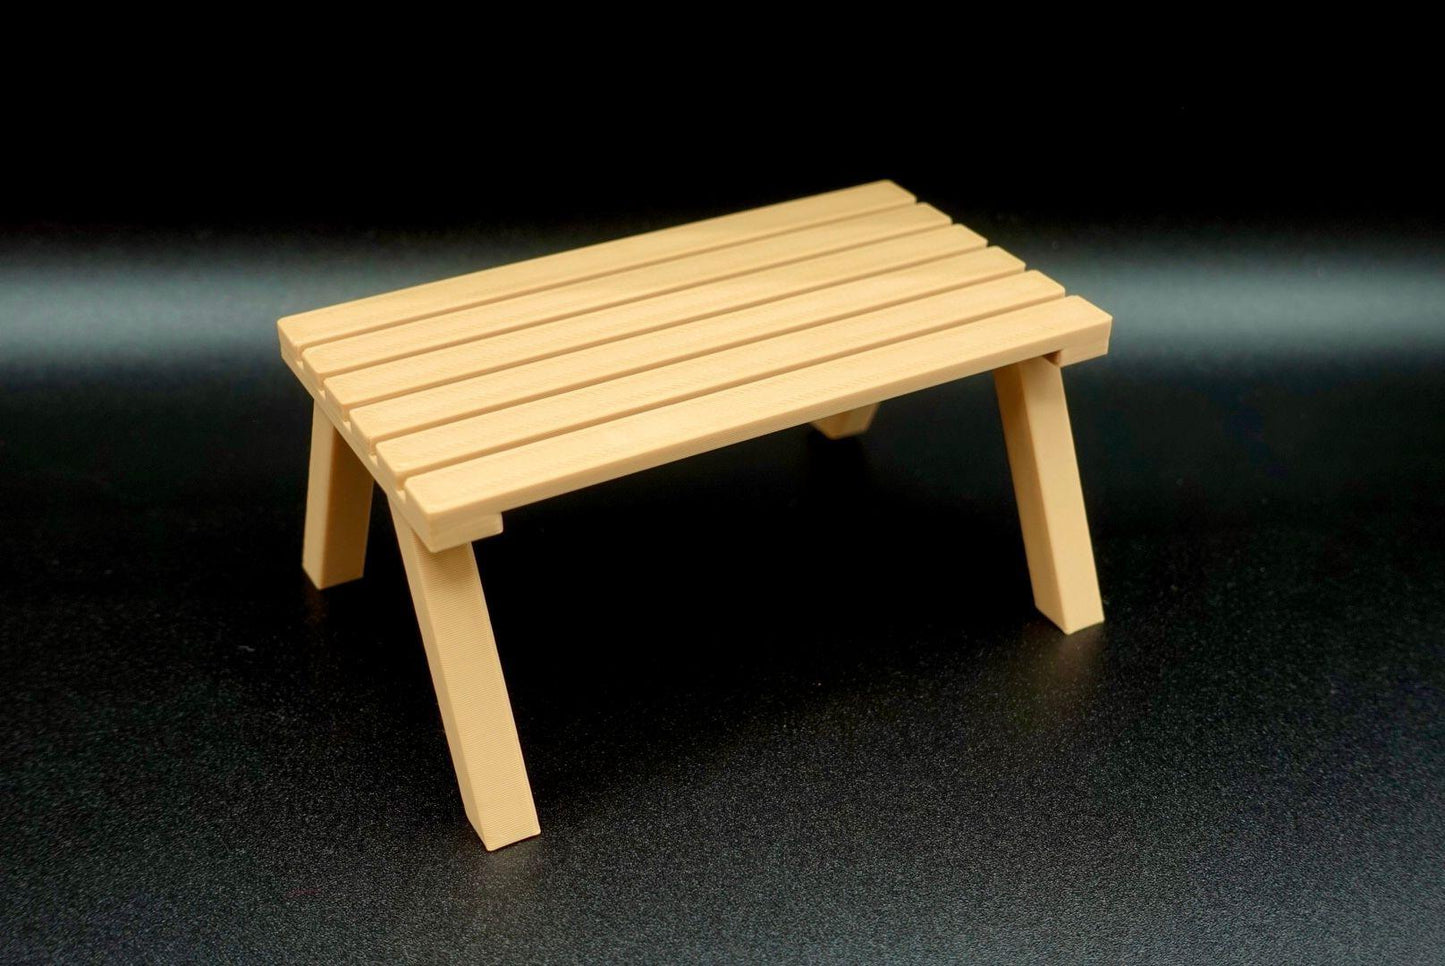 Mini Table Designed Courtesy of Mystic Mesh 3D | Odell Creations